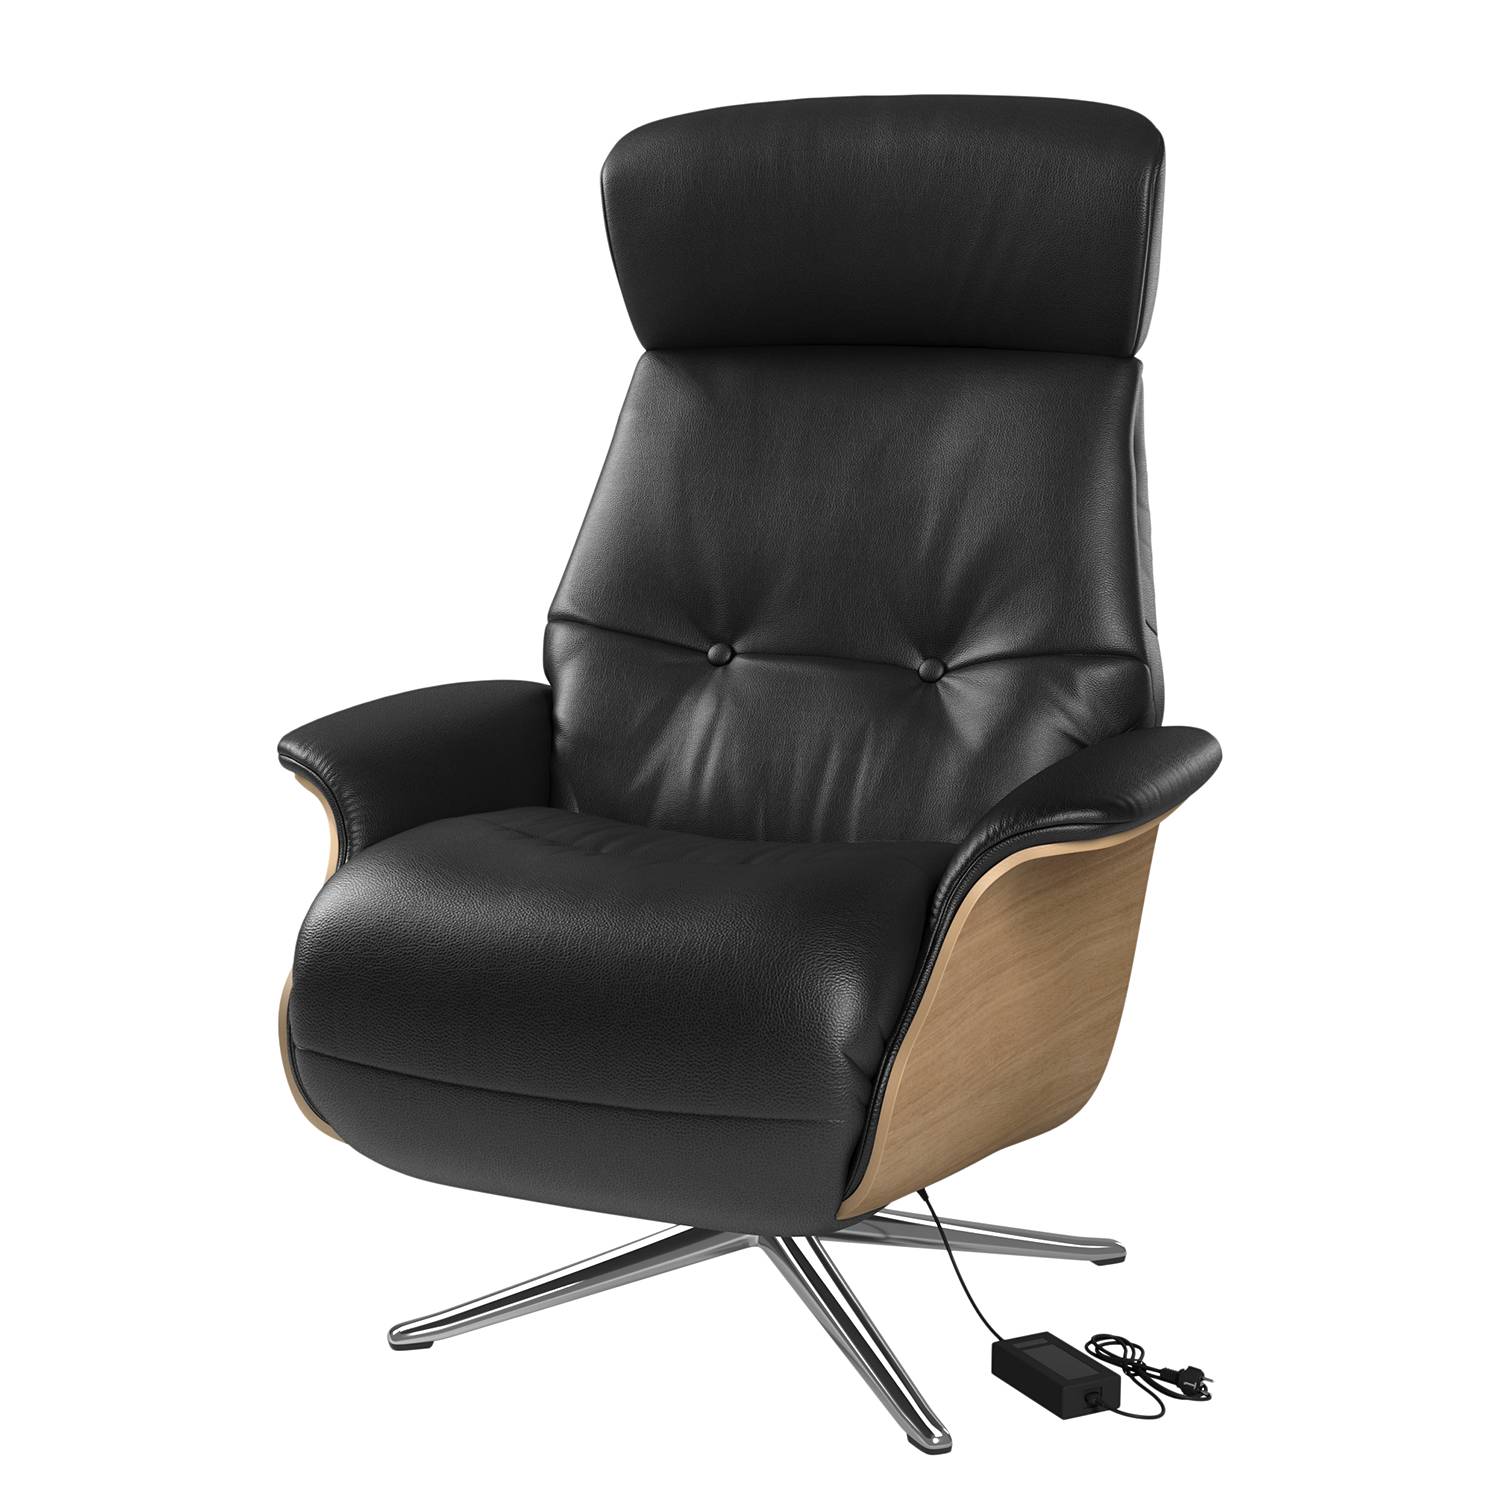 Image of Fauteuil relax Anderson VI 000000001000131438